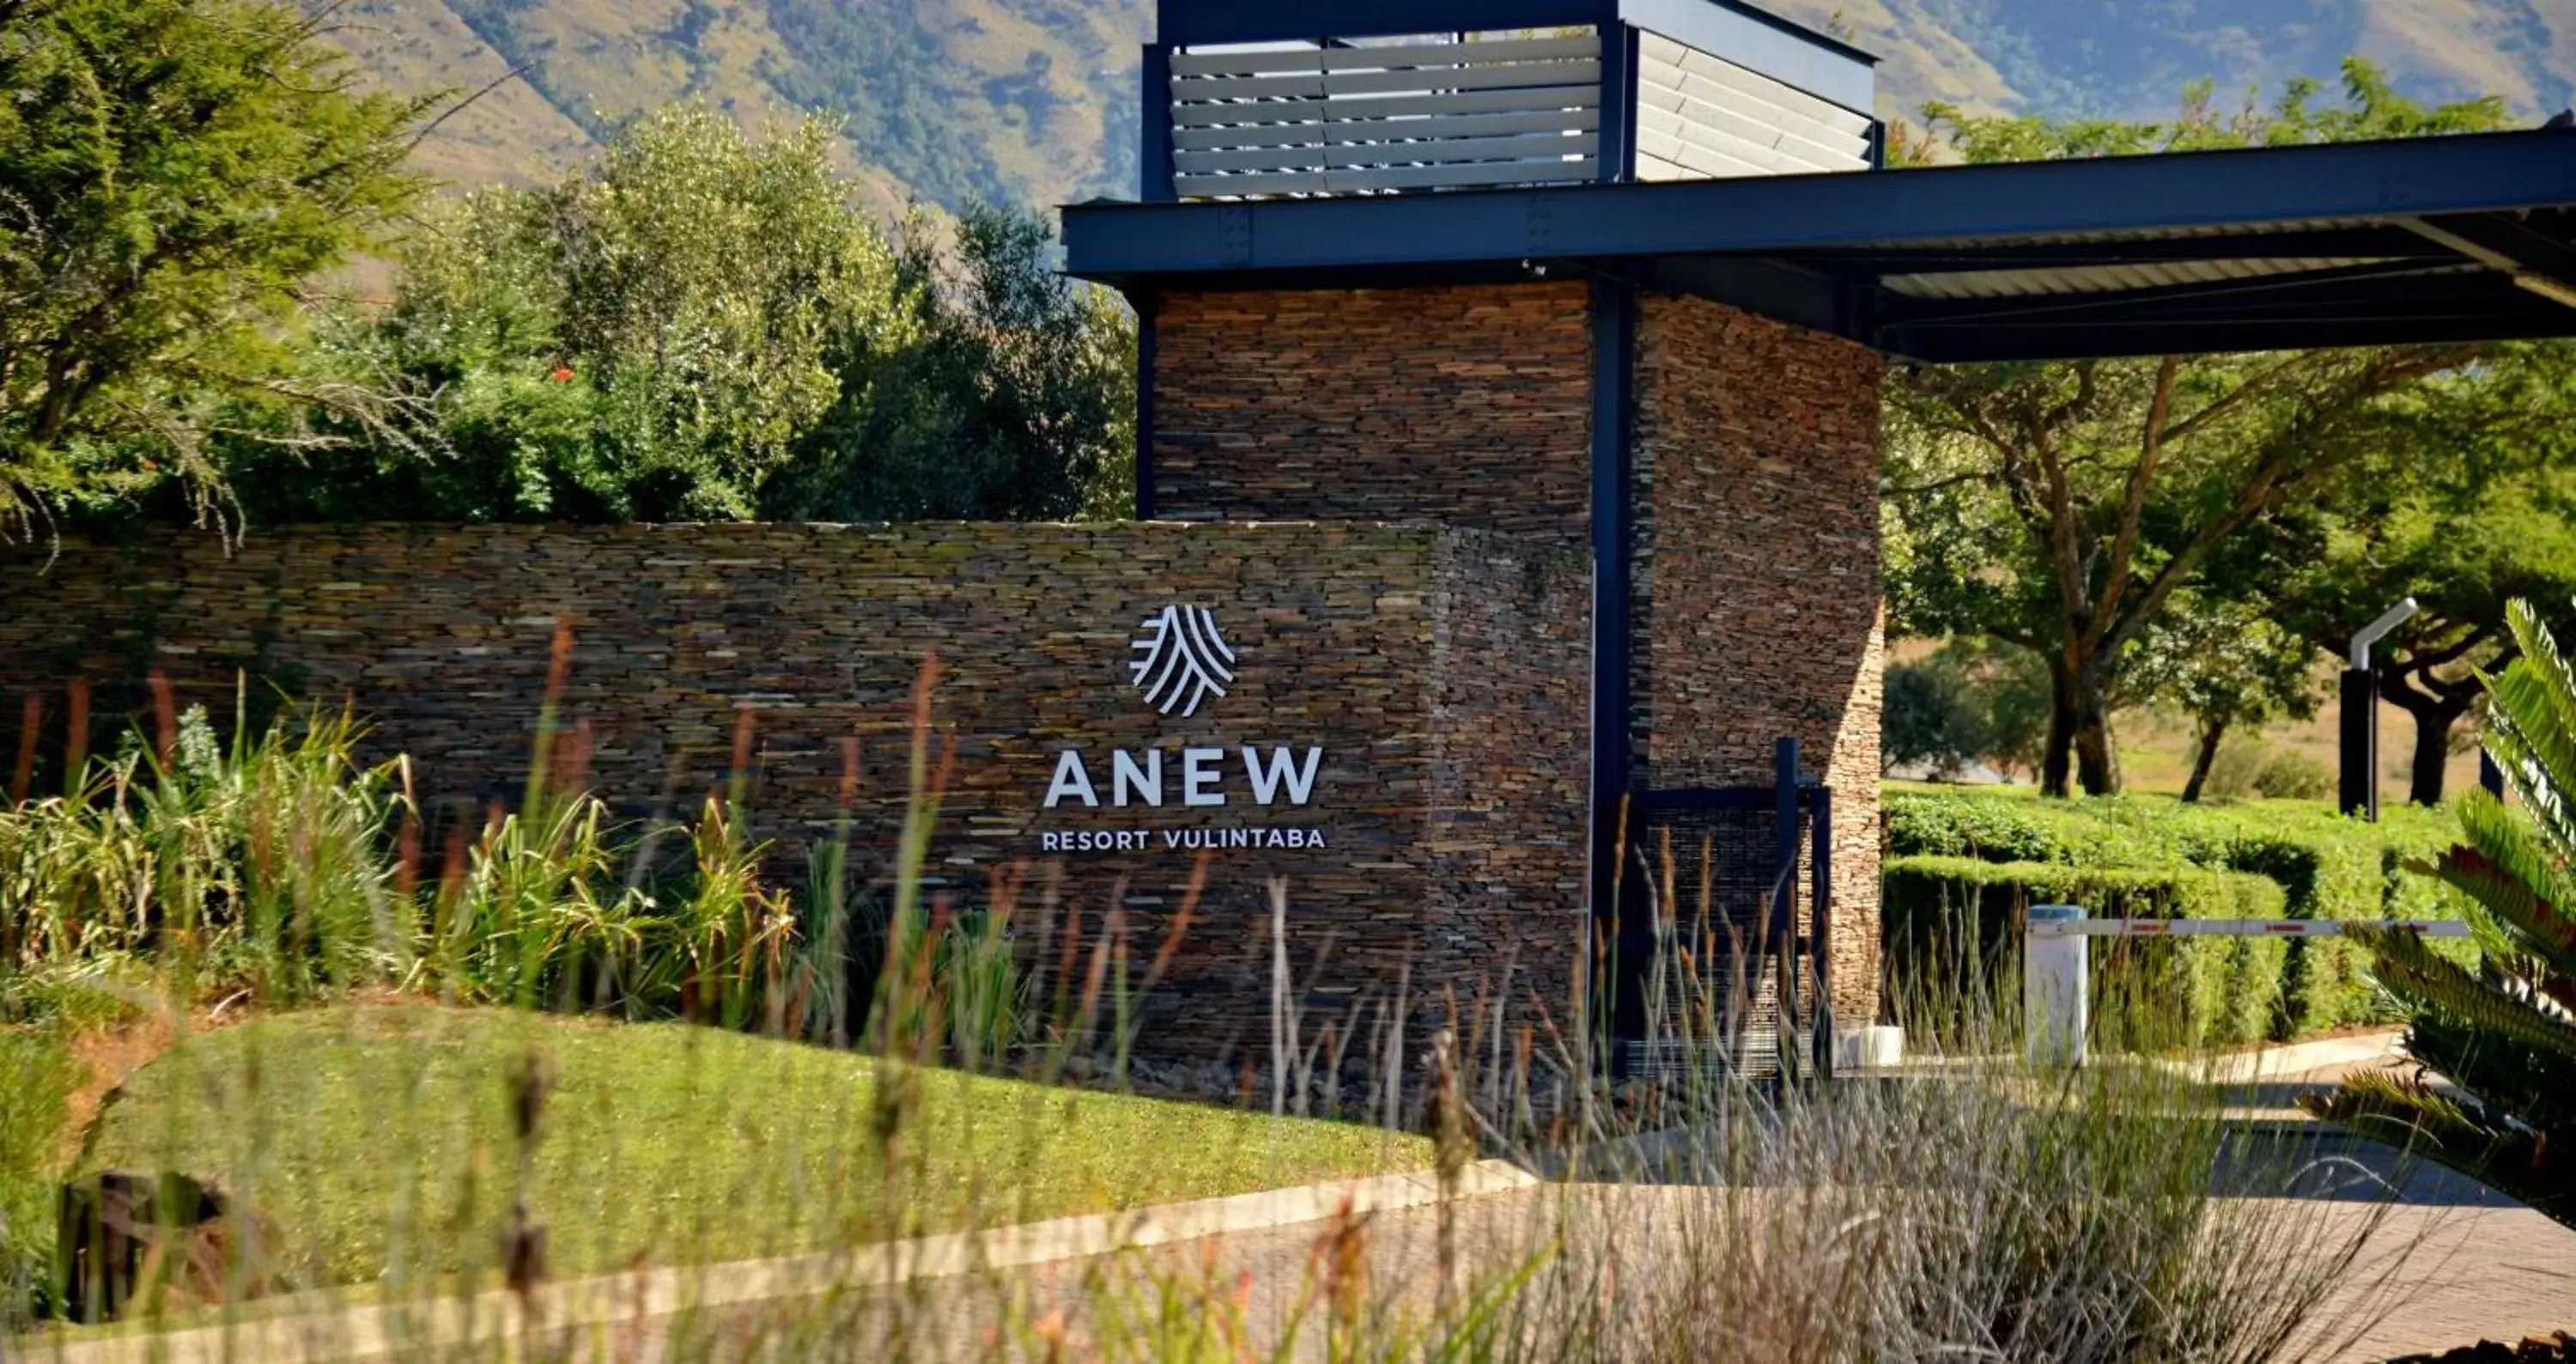 Property building in ANEW Resort Vulintaba Newcastle